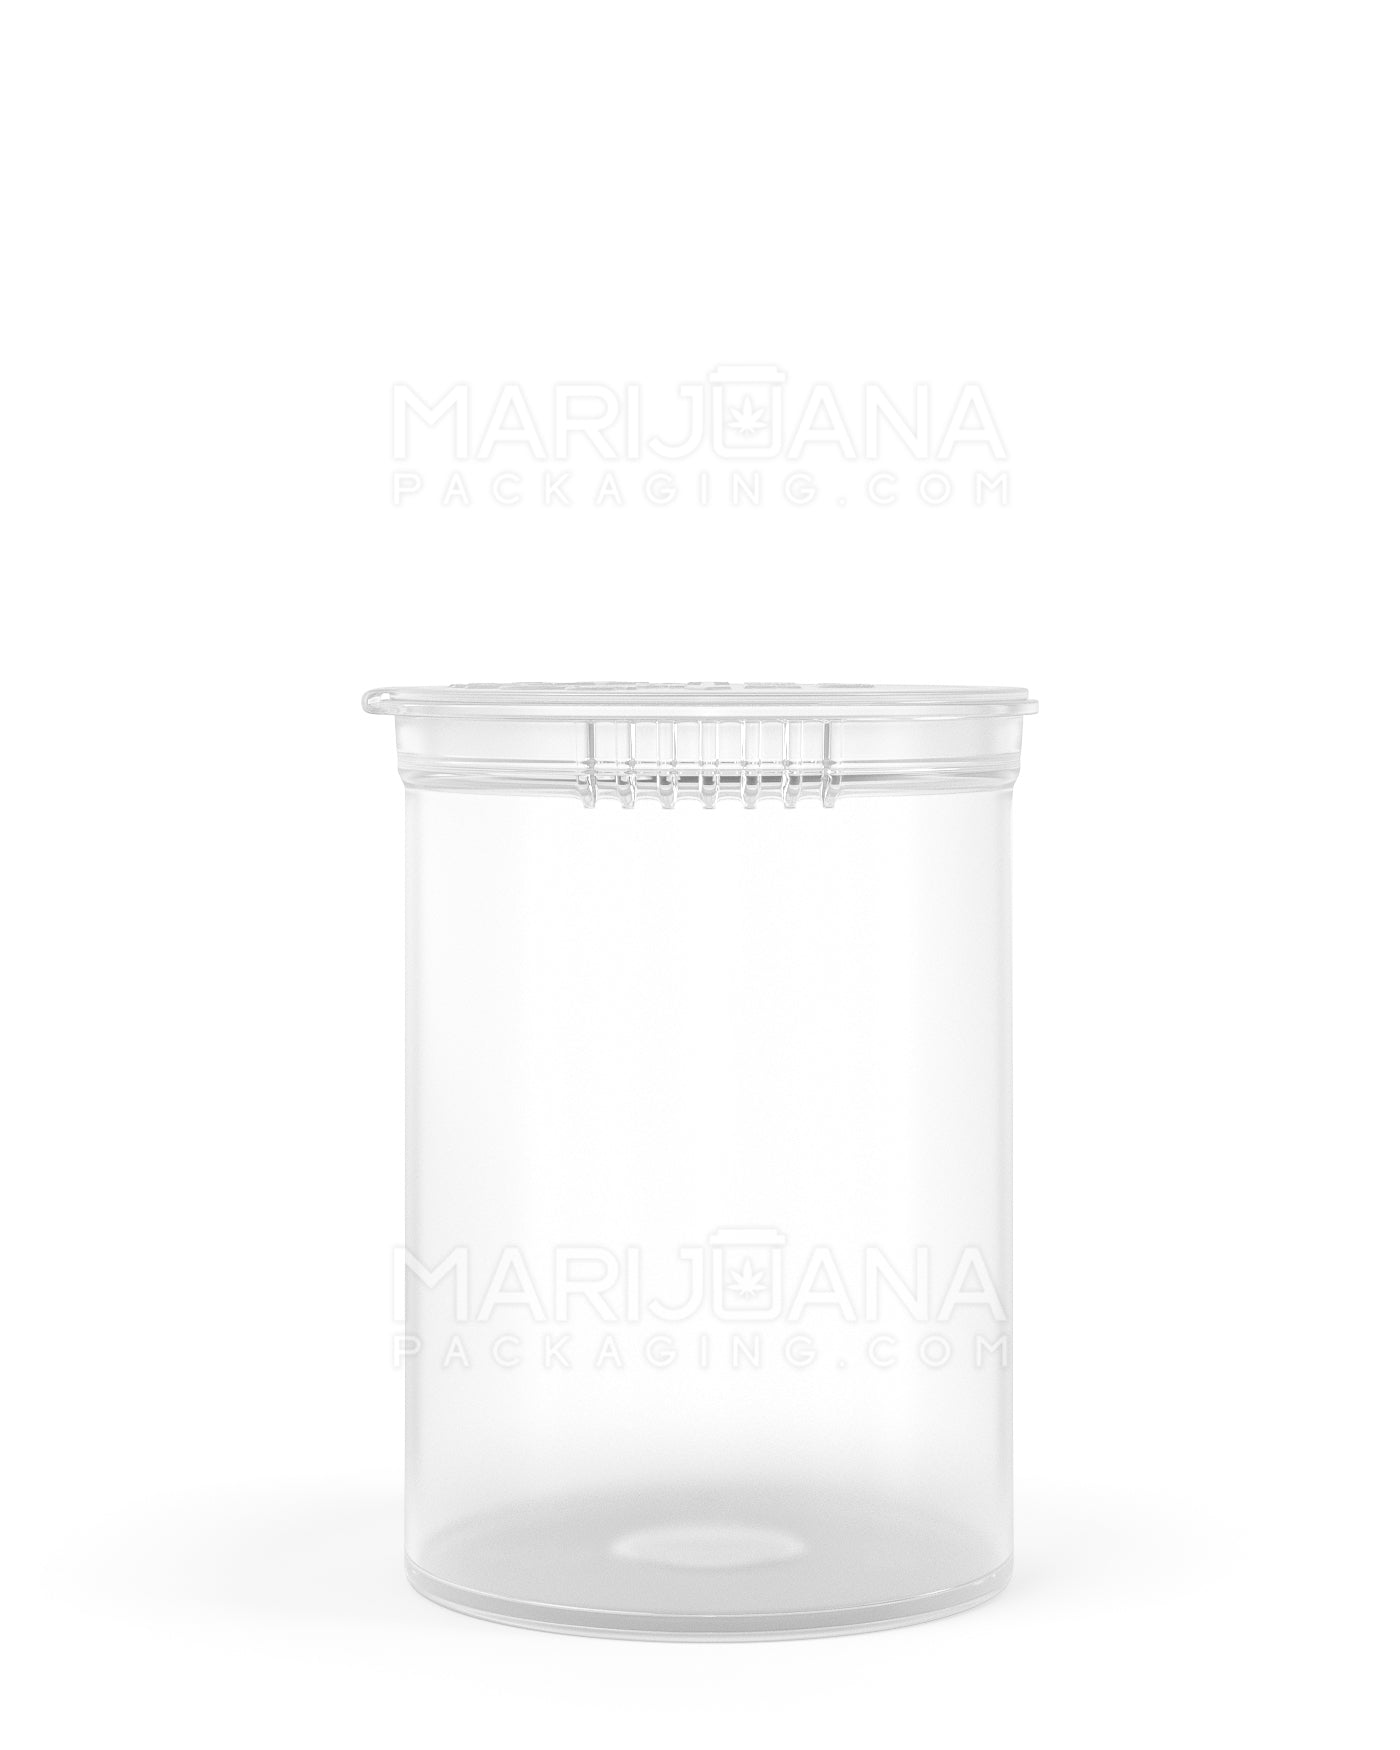 Child Resistant & Sustainable | 100% Biodegradable Clear Pop Top Bottles | 30dr - 7g - 150 Count - 3